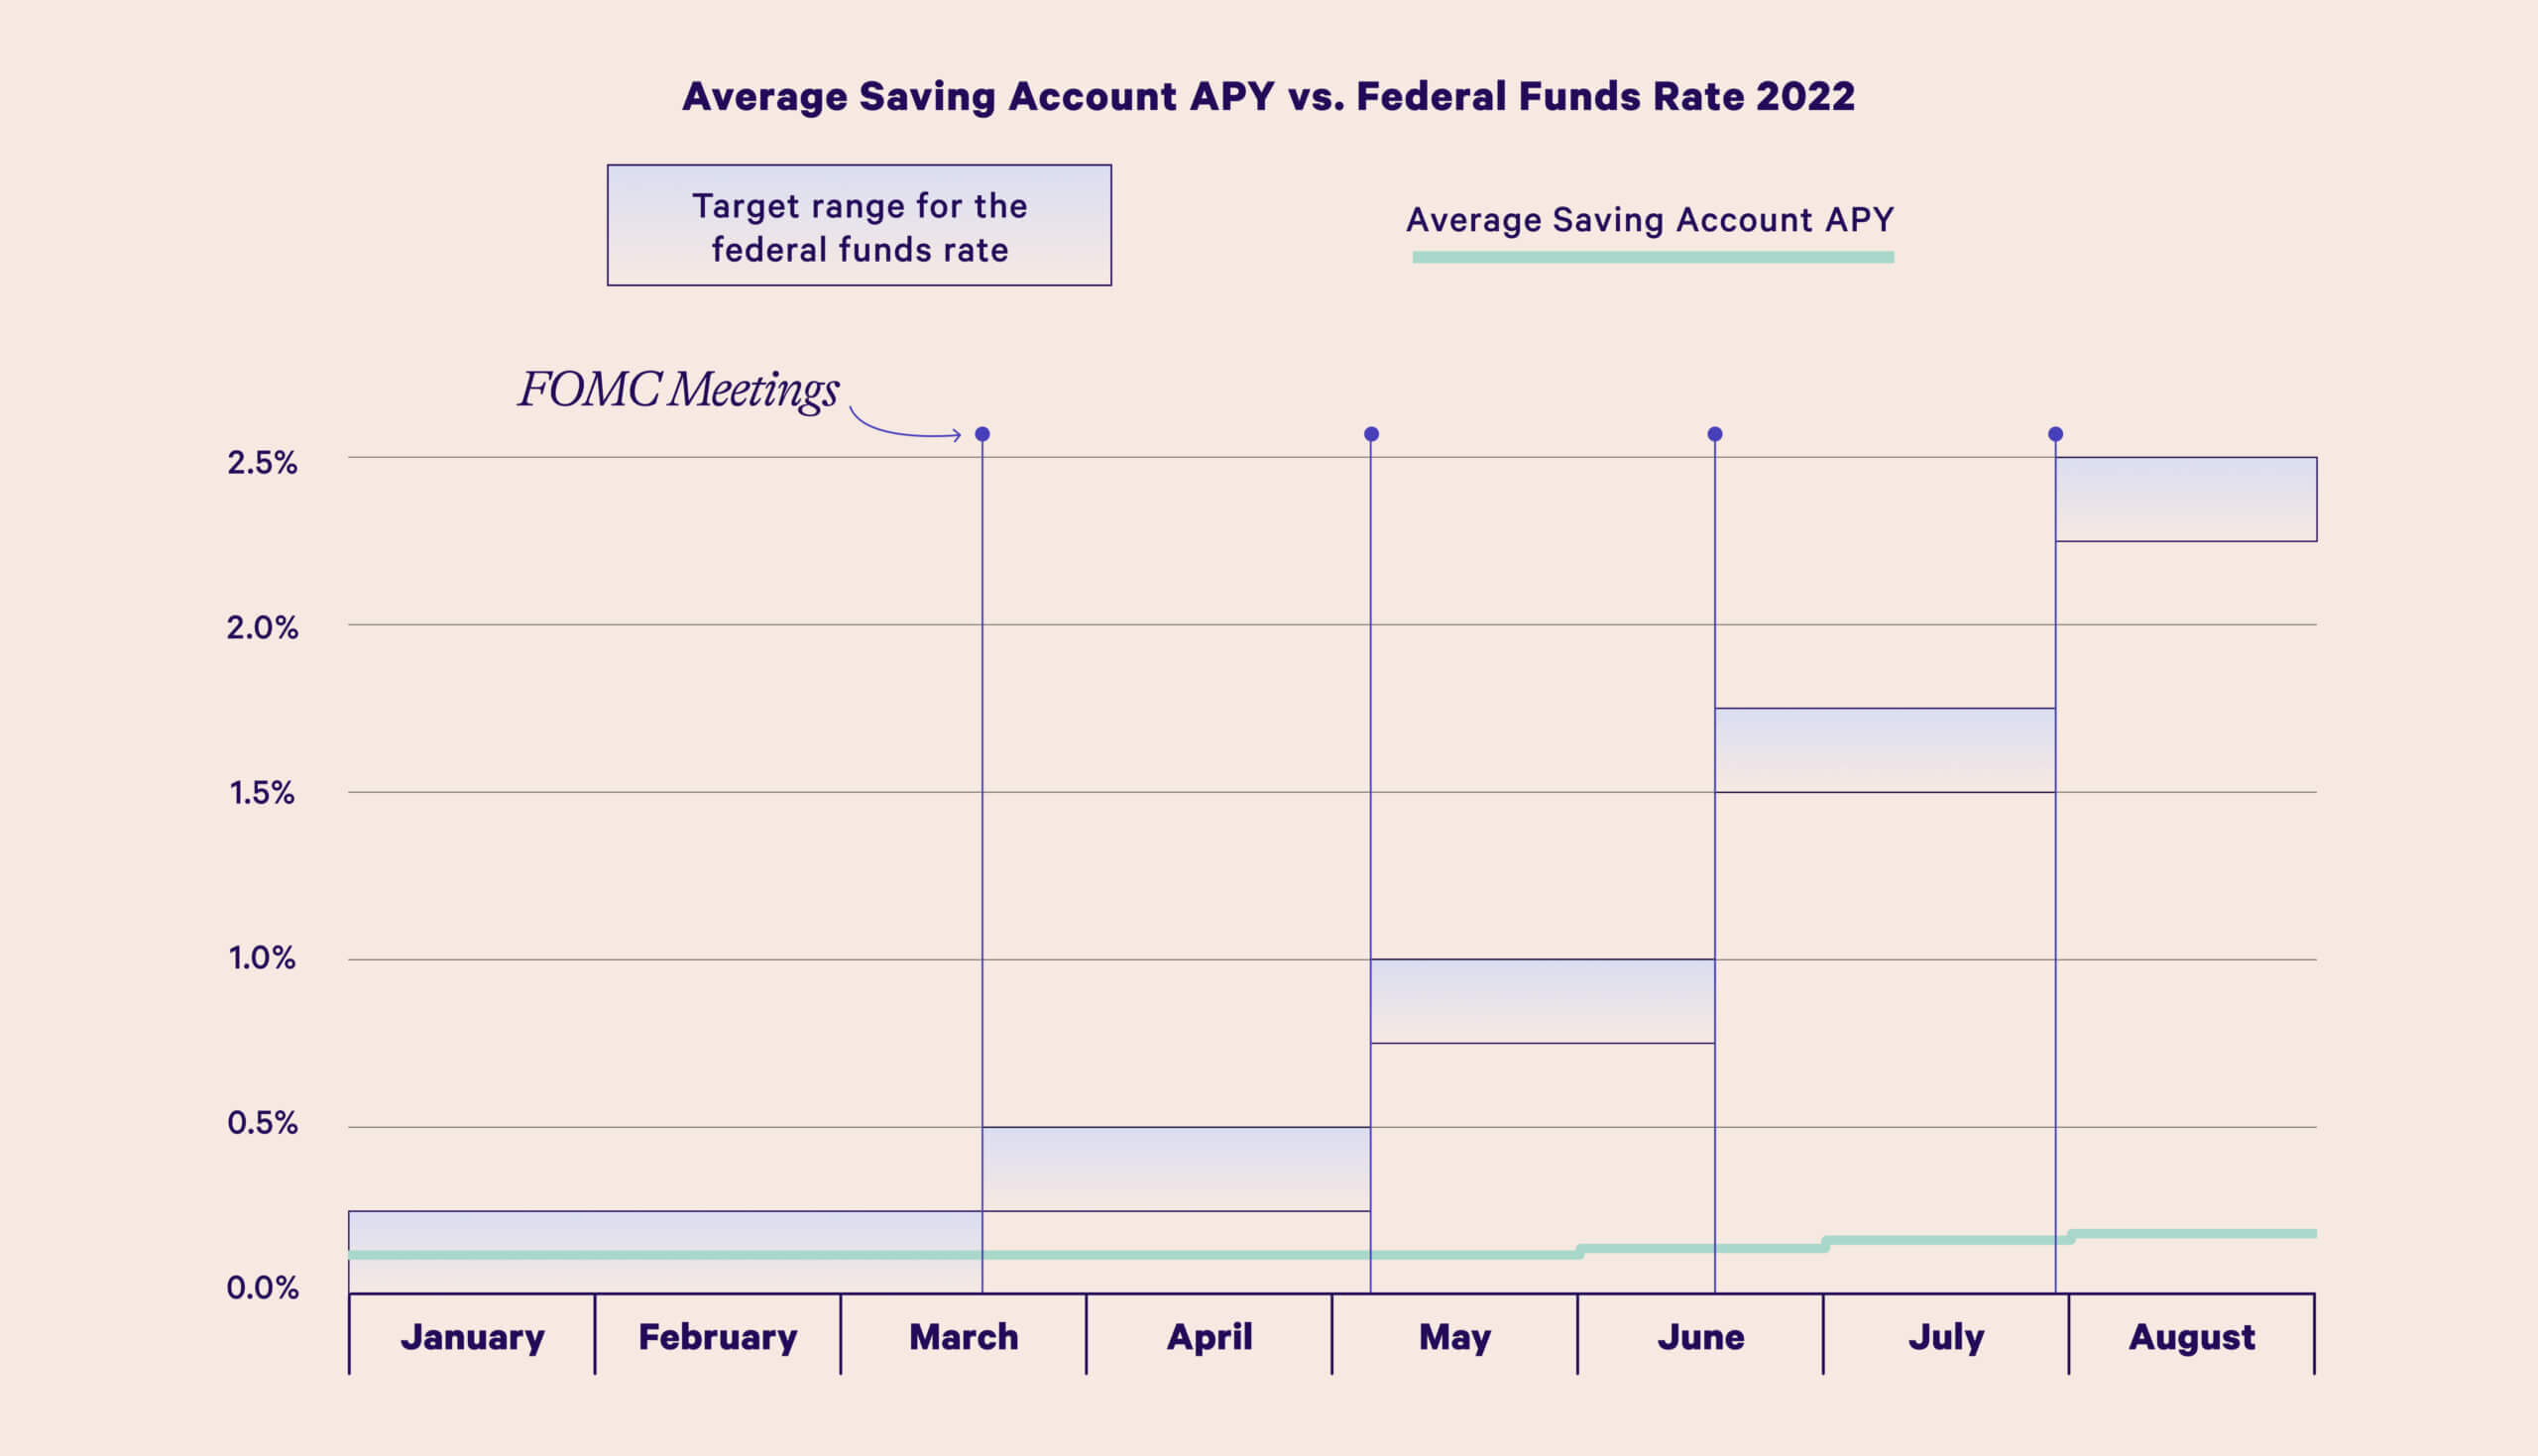 Chart showing how the average savings account APY has not risen at the same rate as the target range for the federal funds rate